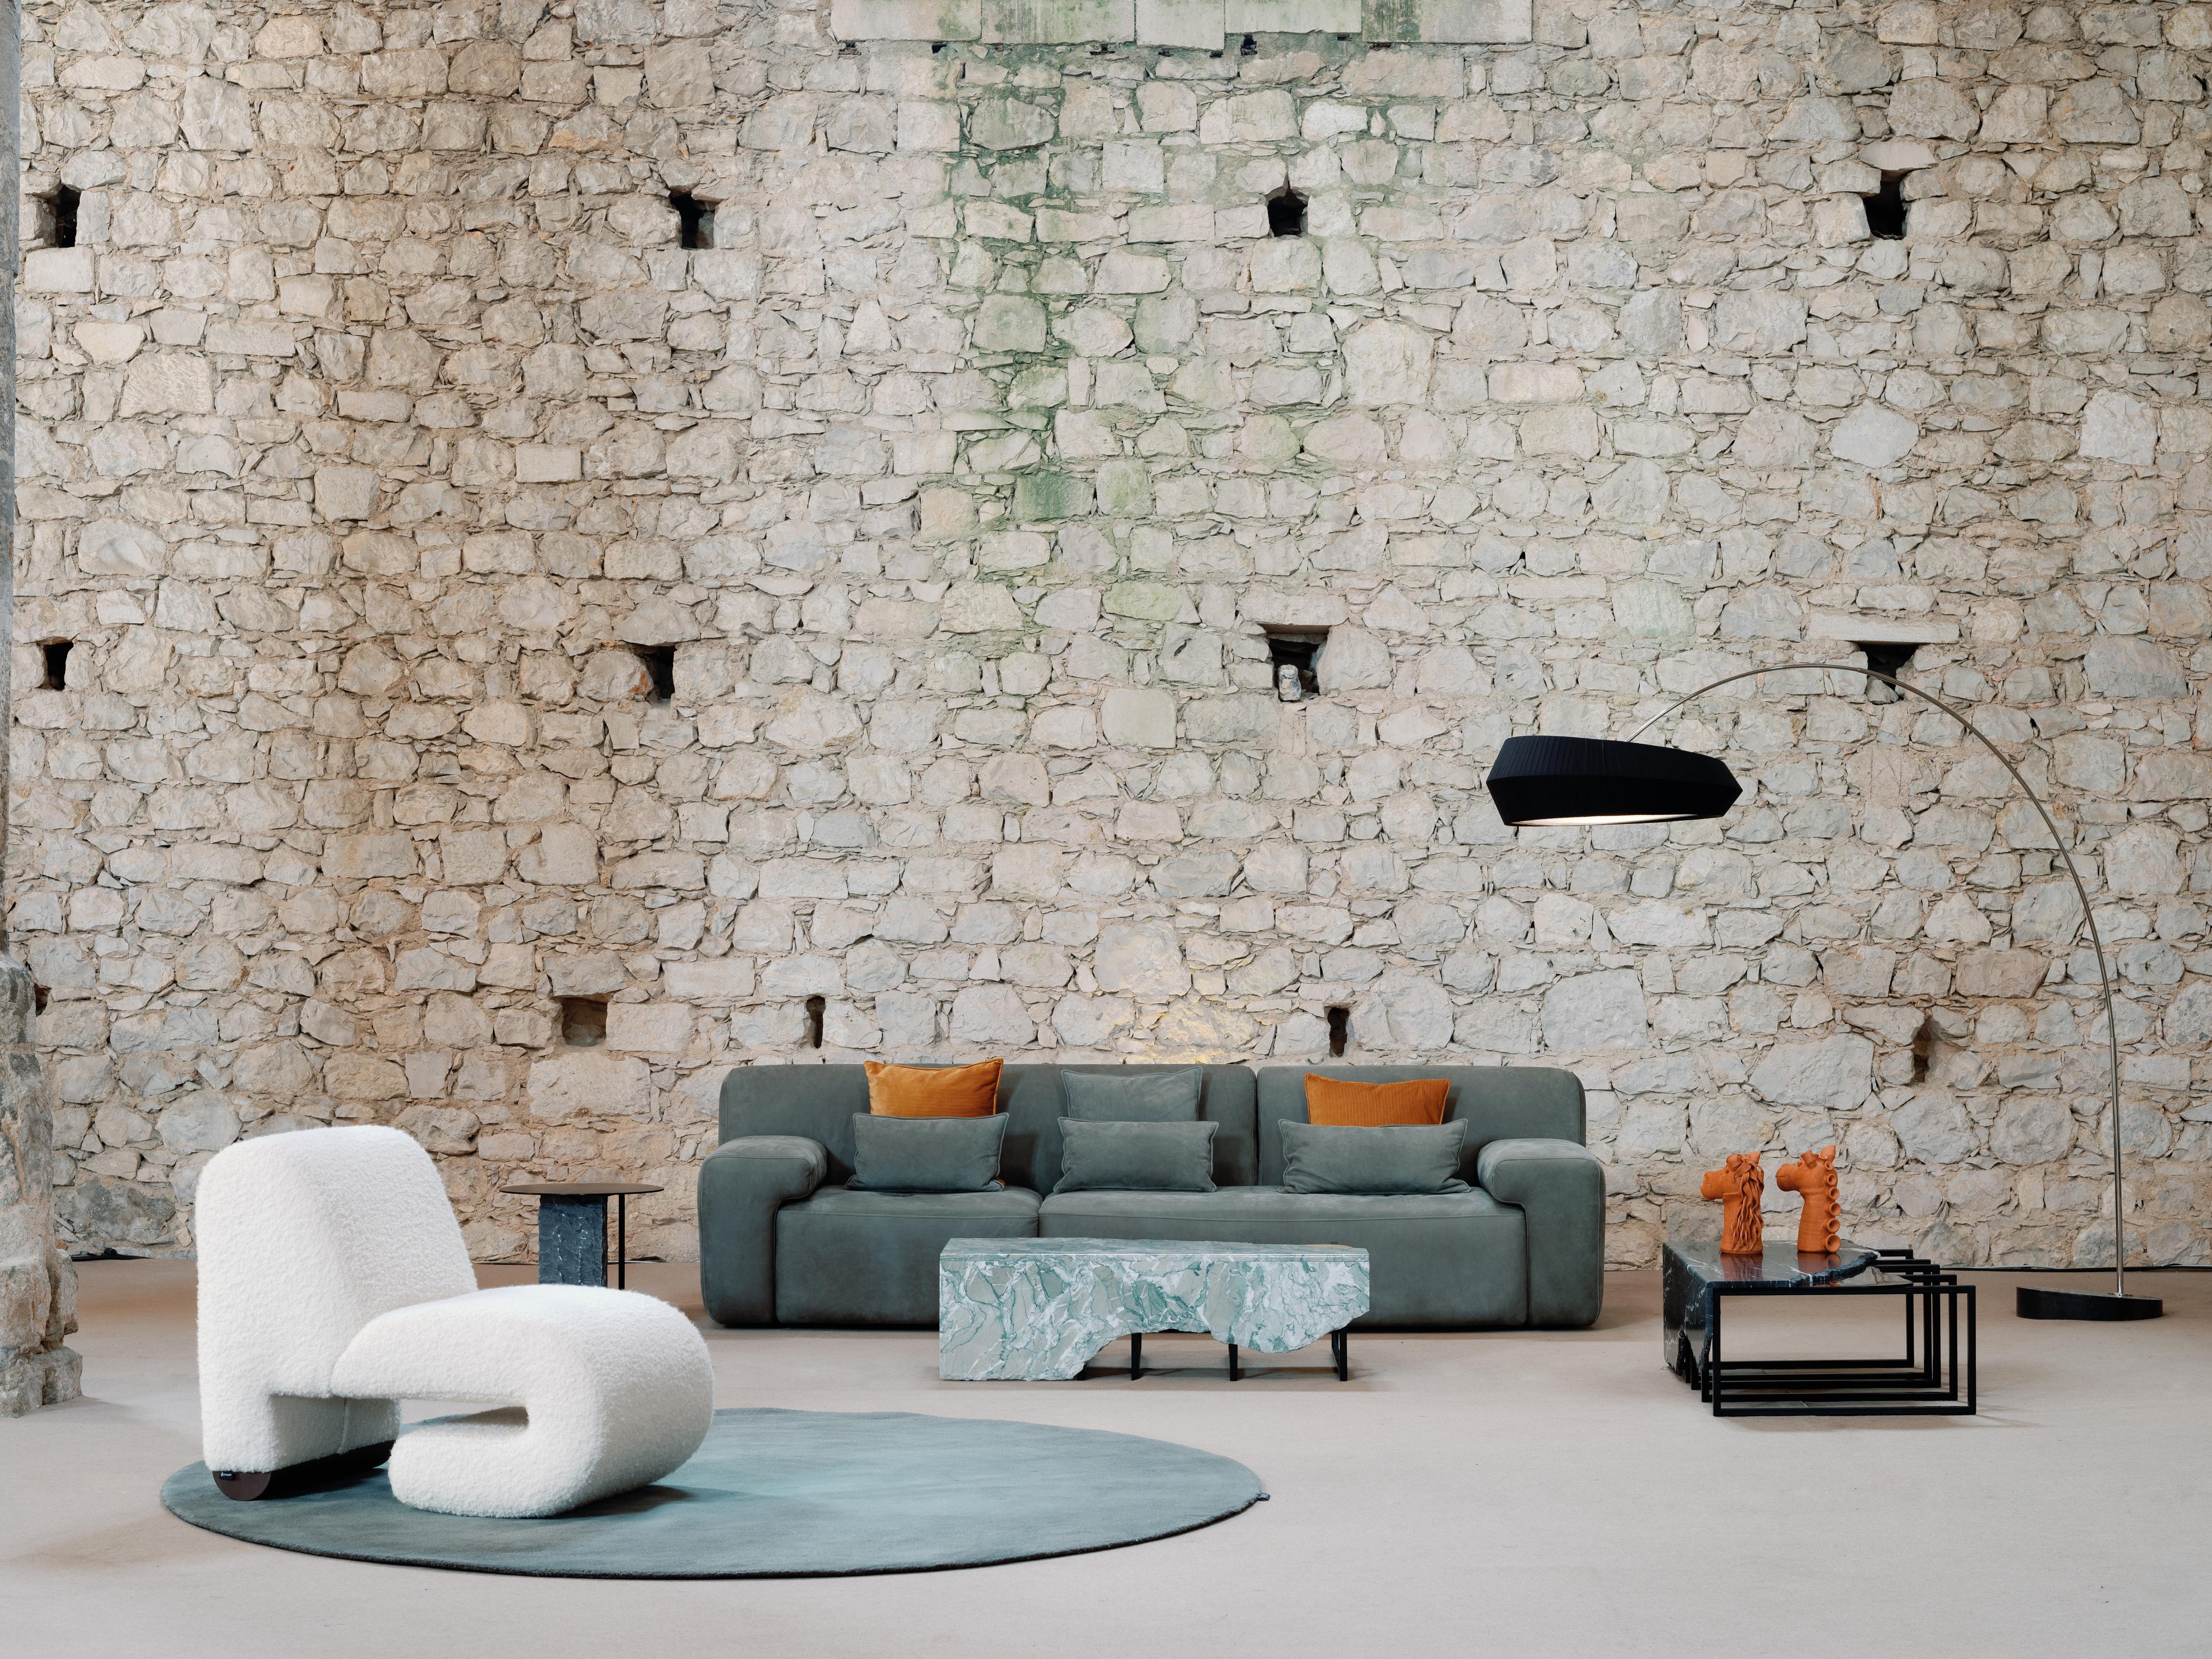 Aire Coffee Table, Contemporary Collection, Handcrafted in Portugal - Europe by Greenapple.

Designed by Rute Martins for the Contemporary Collection, the Aire marble coffee table features a bold and distinctive design, seamlessly complementing